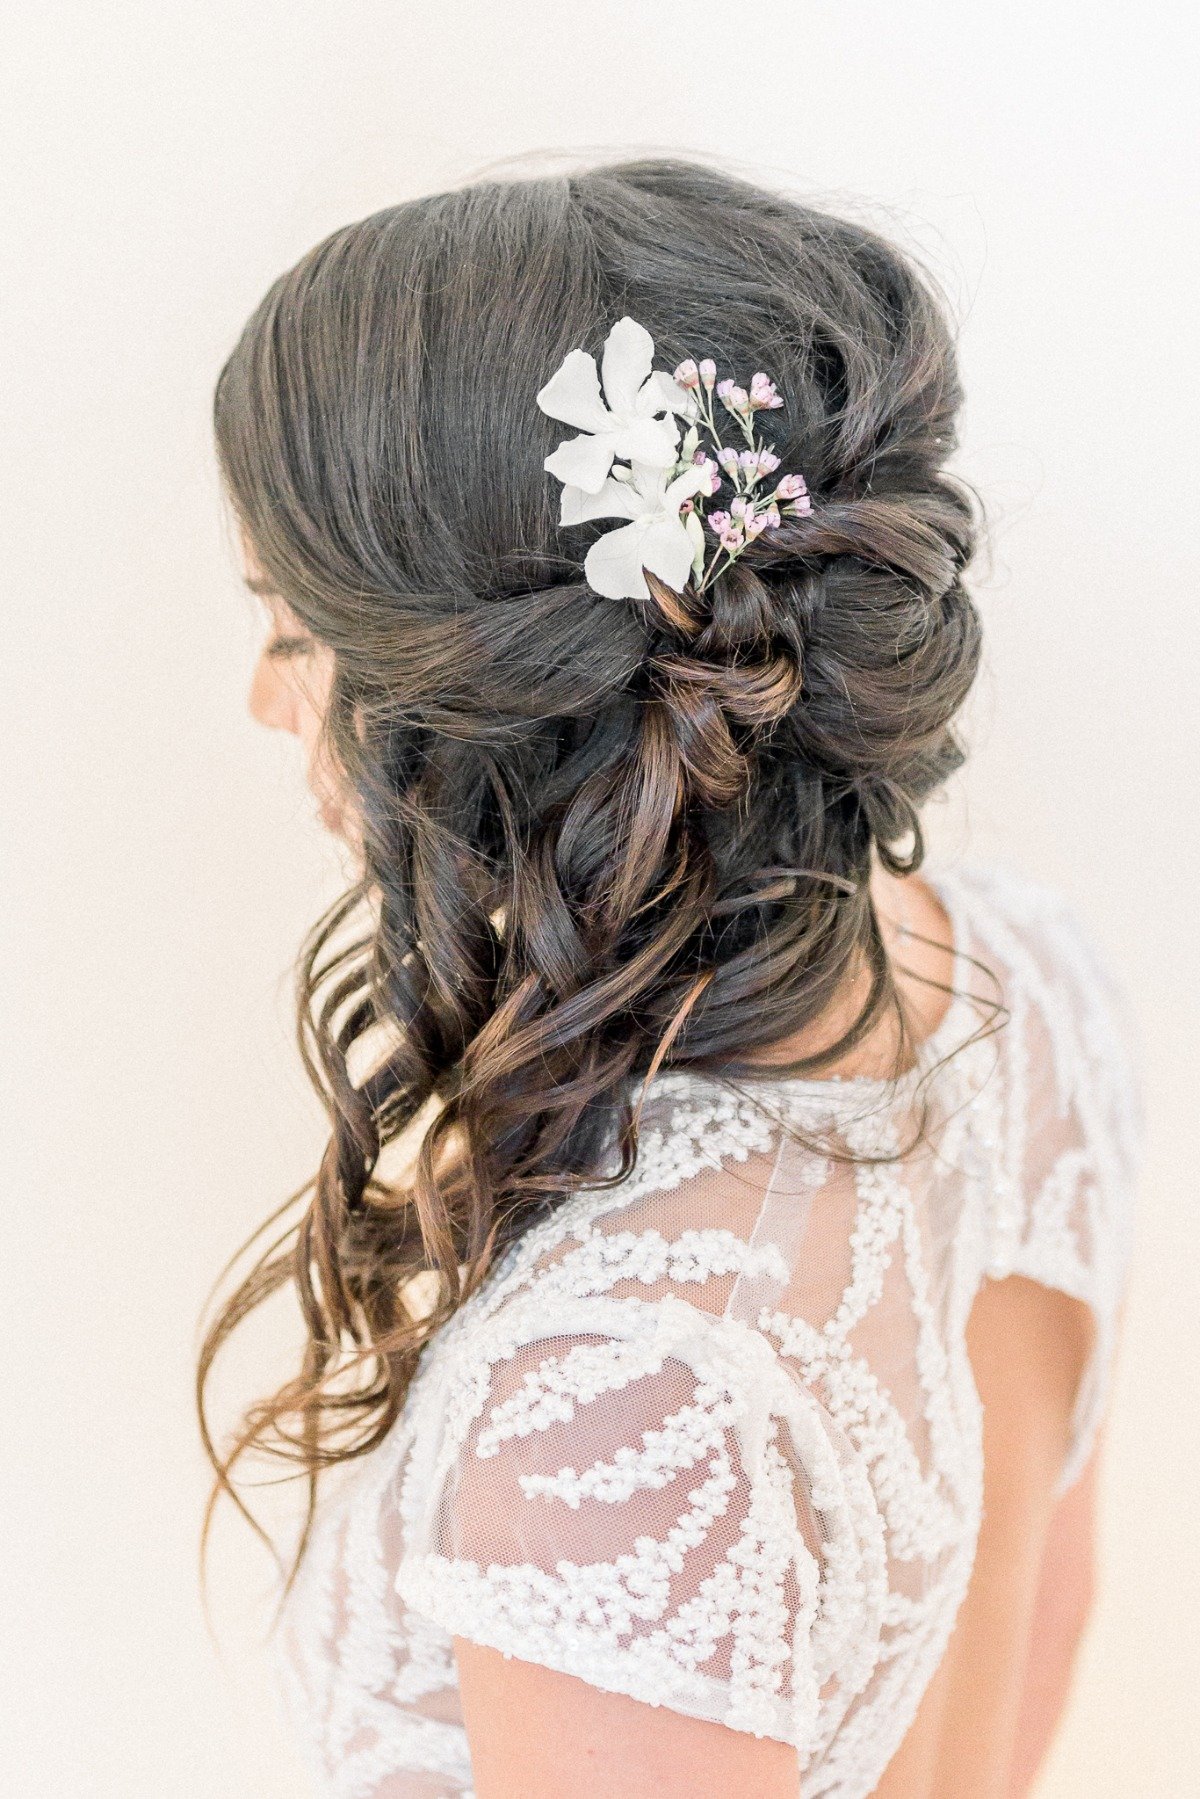 Close-up of bride's wedding hair with hairpiece